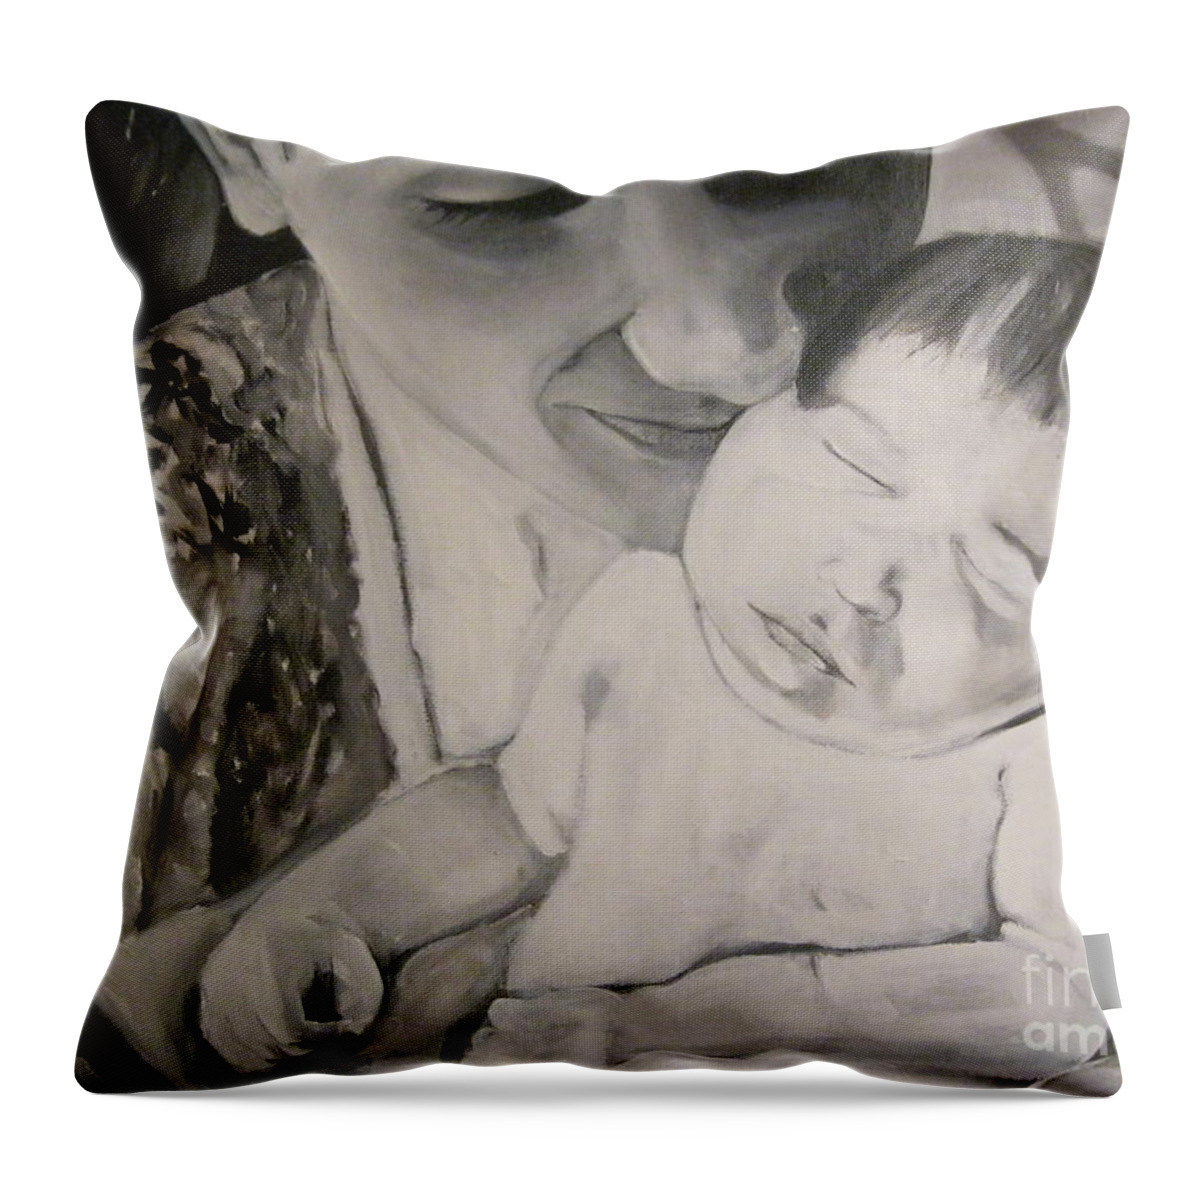 Woman Throw Pillow featuring the painting Mother and Child by Carrie Maurer